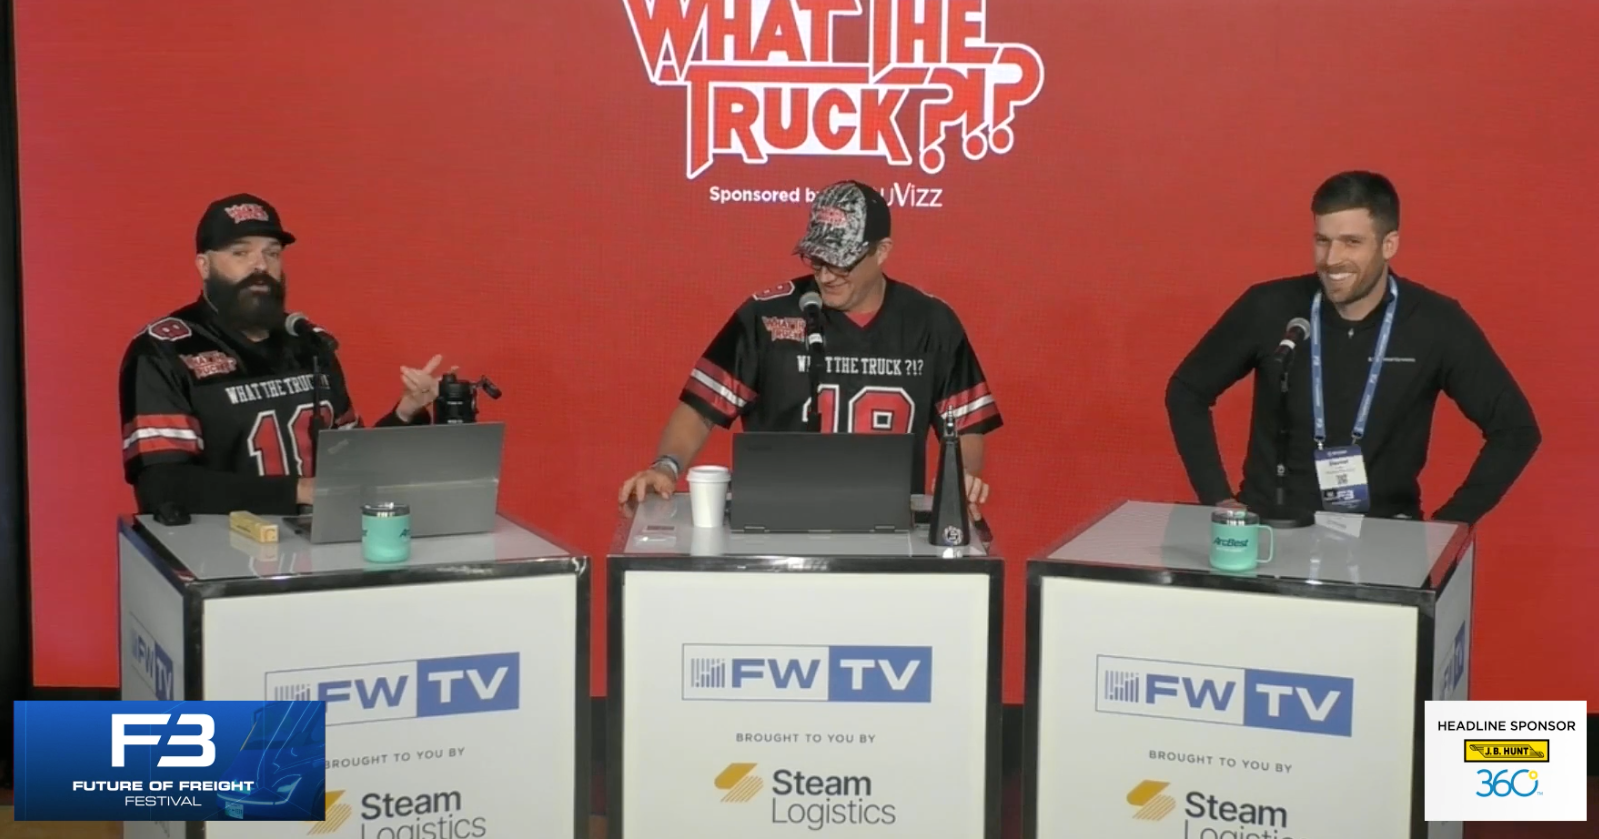 Daniel Powell with What the Truck?!? Hosts